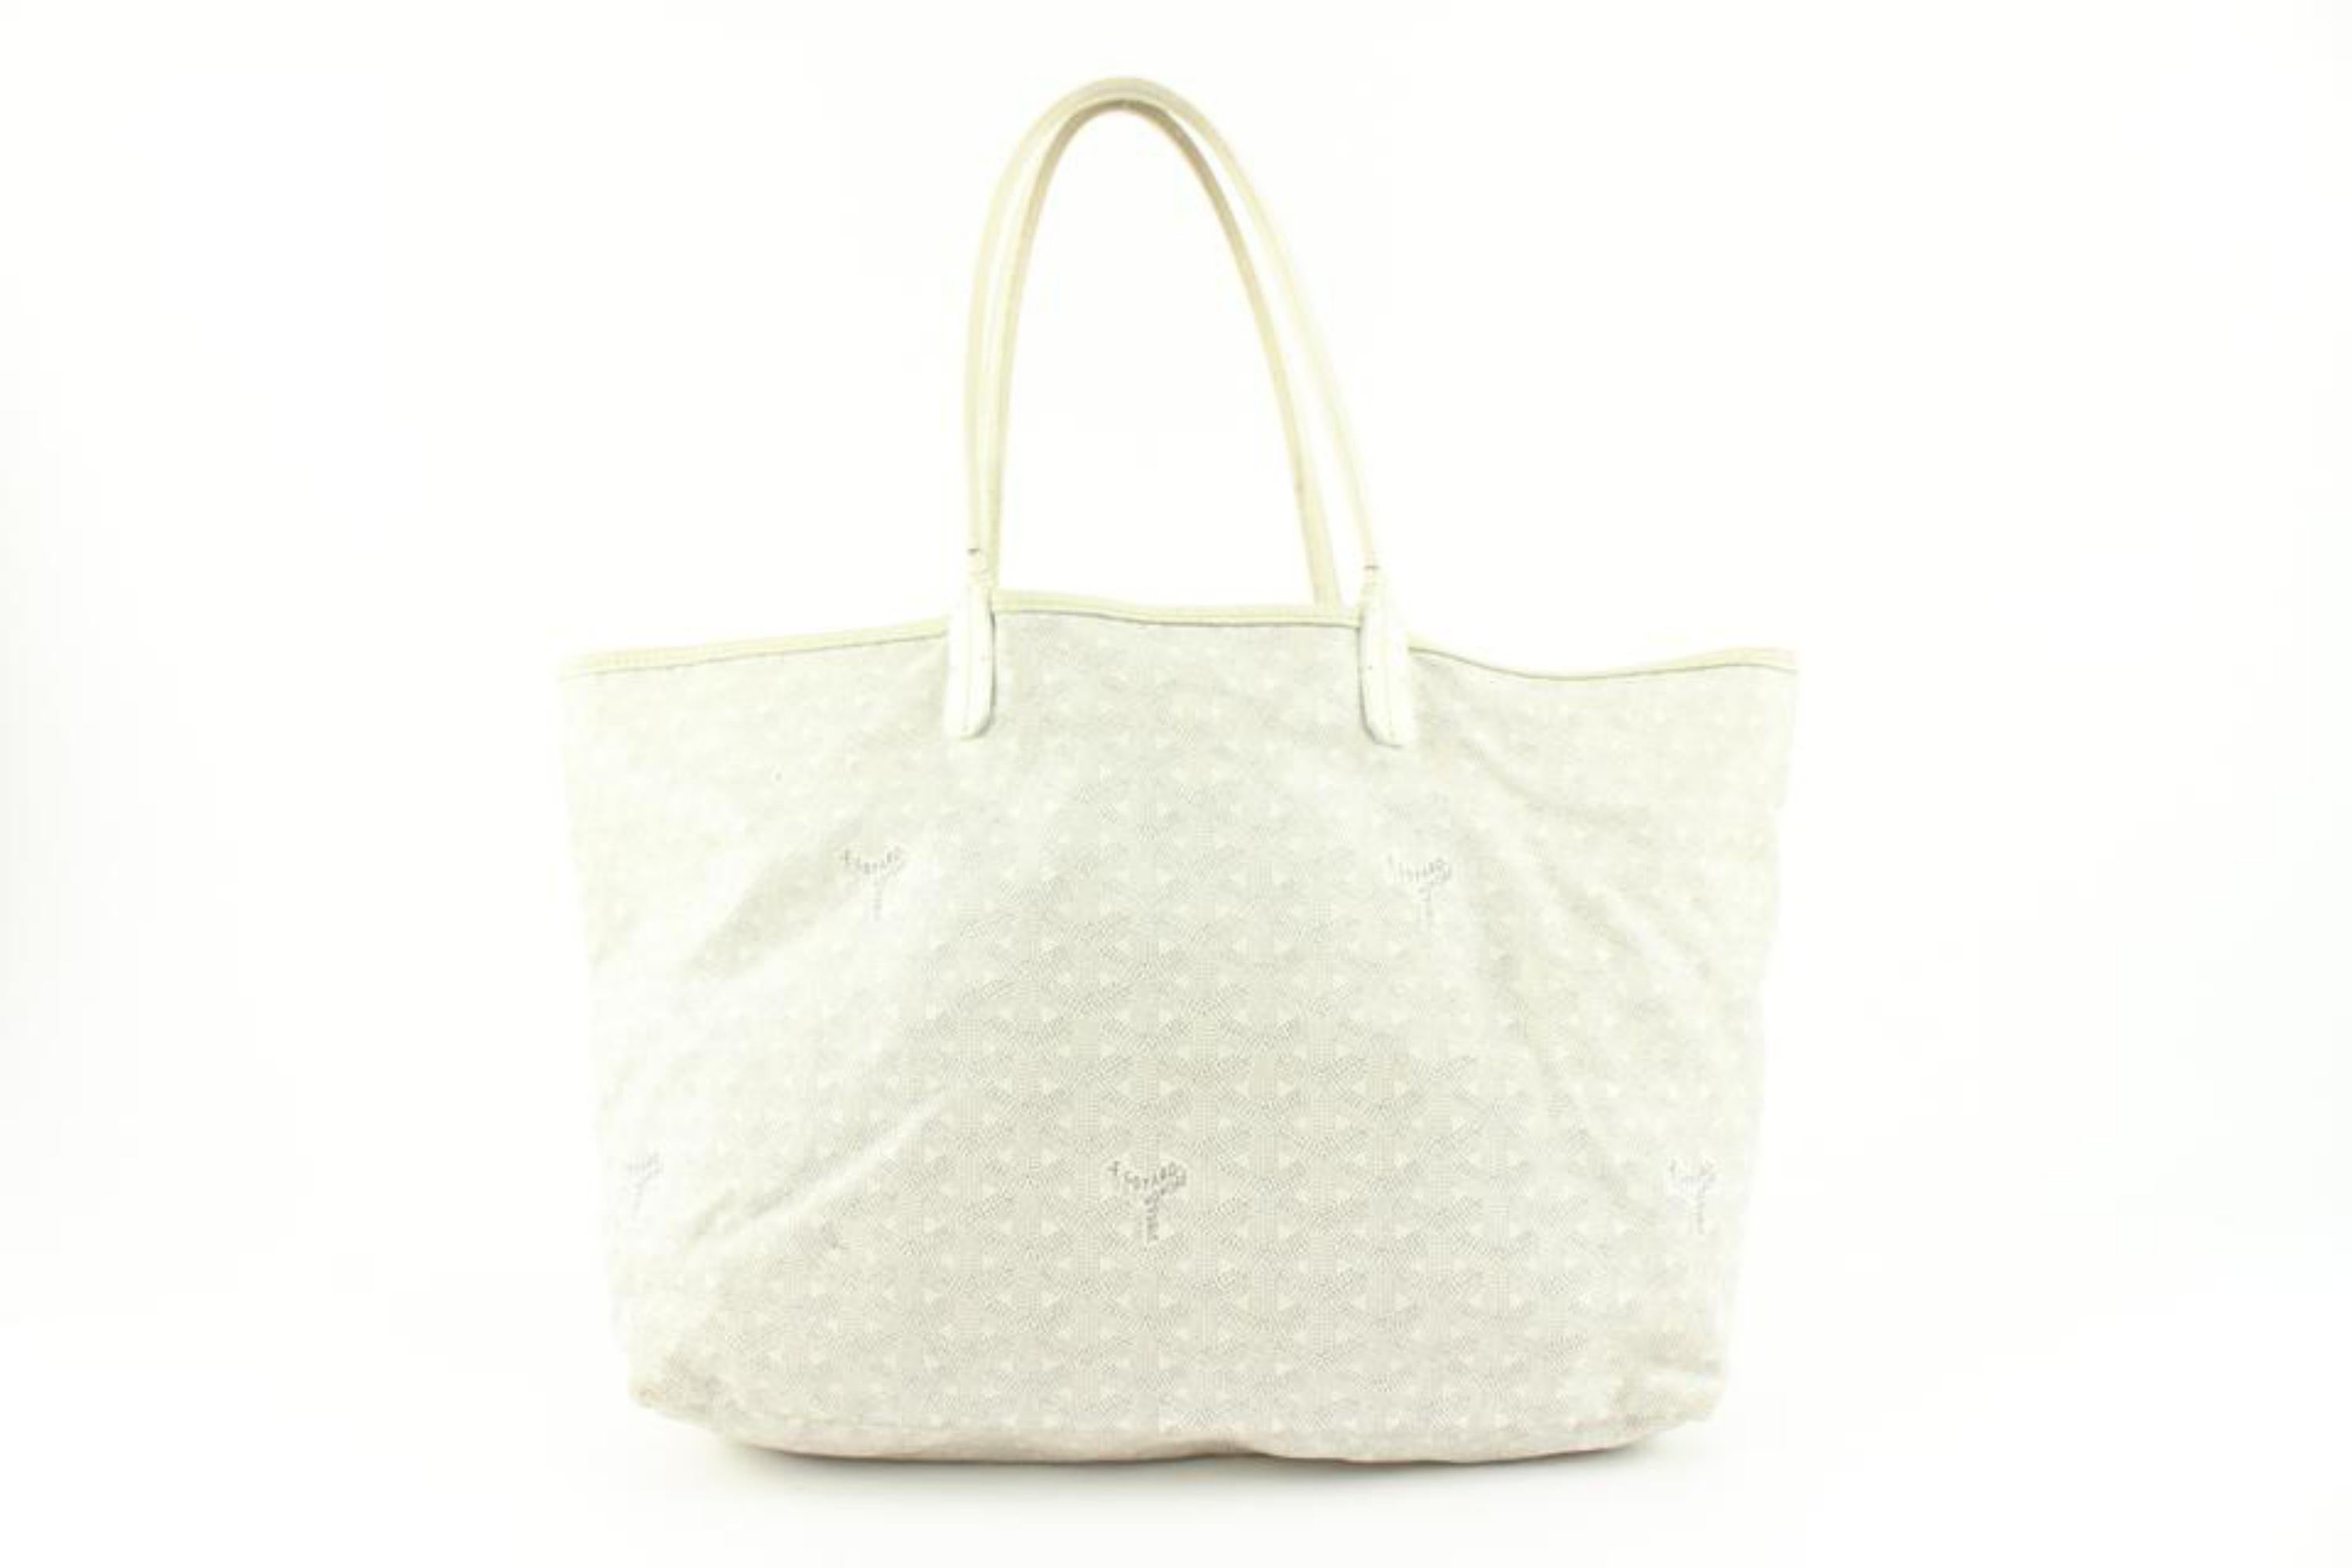 Gray Goyard White St Louis PM Tote Bag with Pouch 113gy45 For Sale